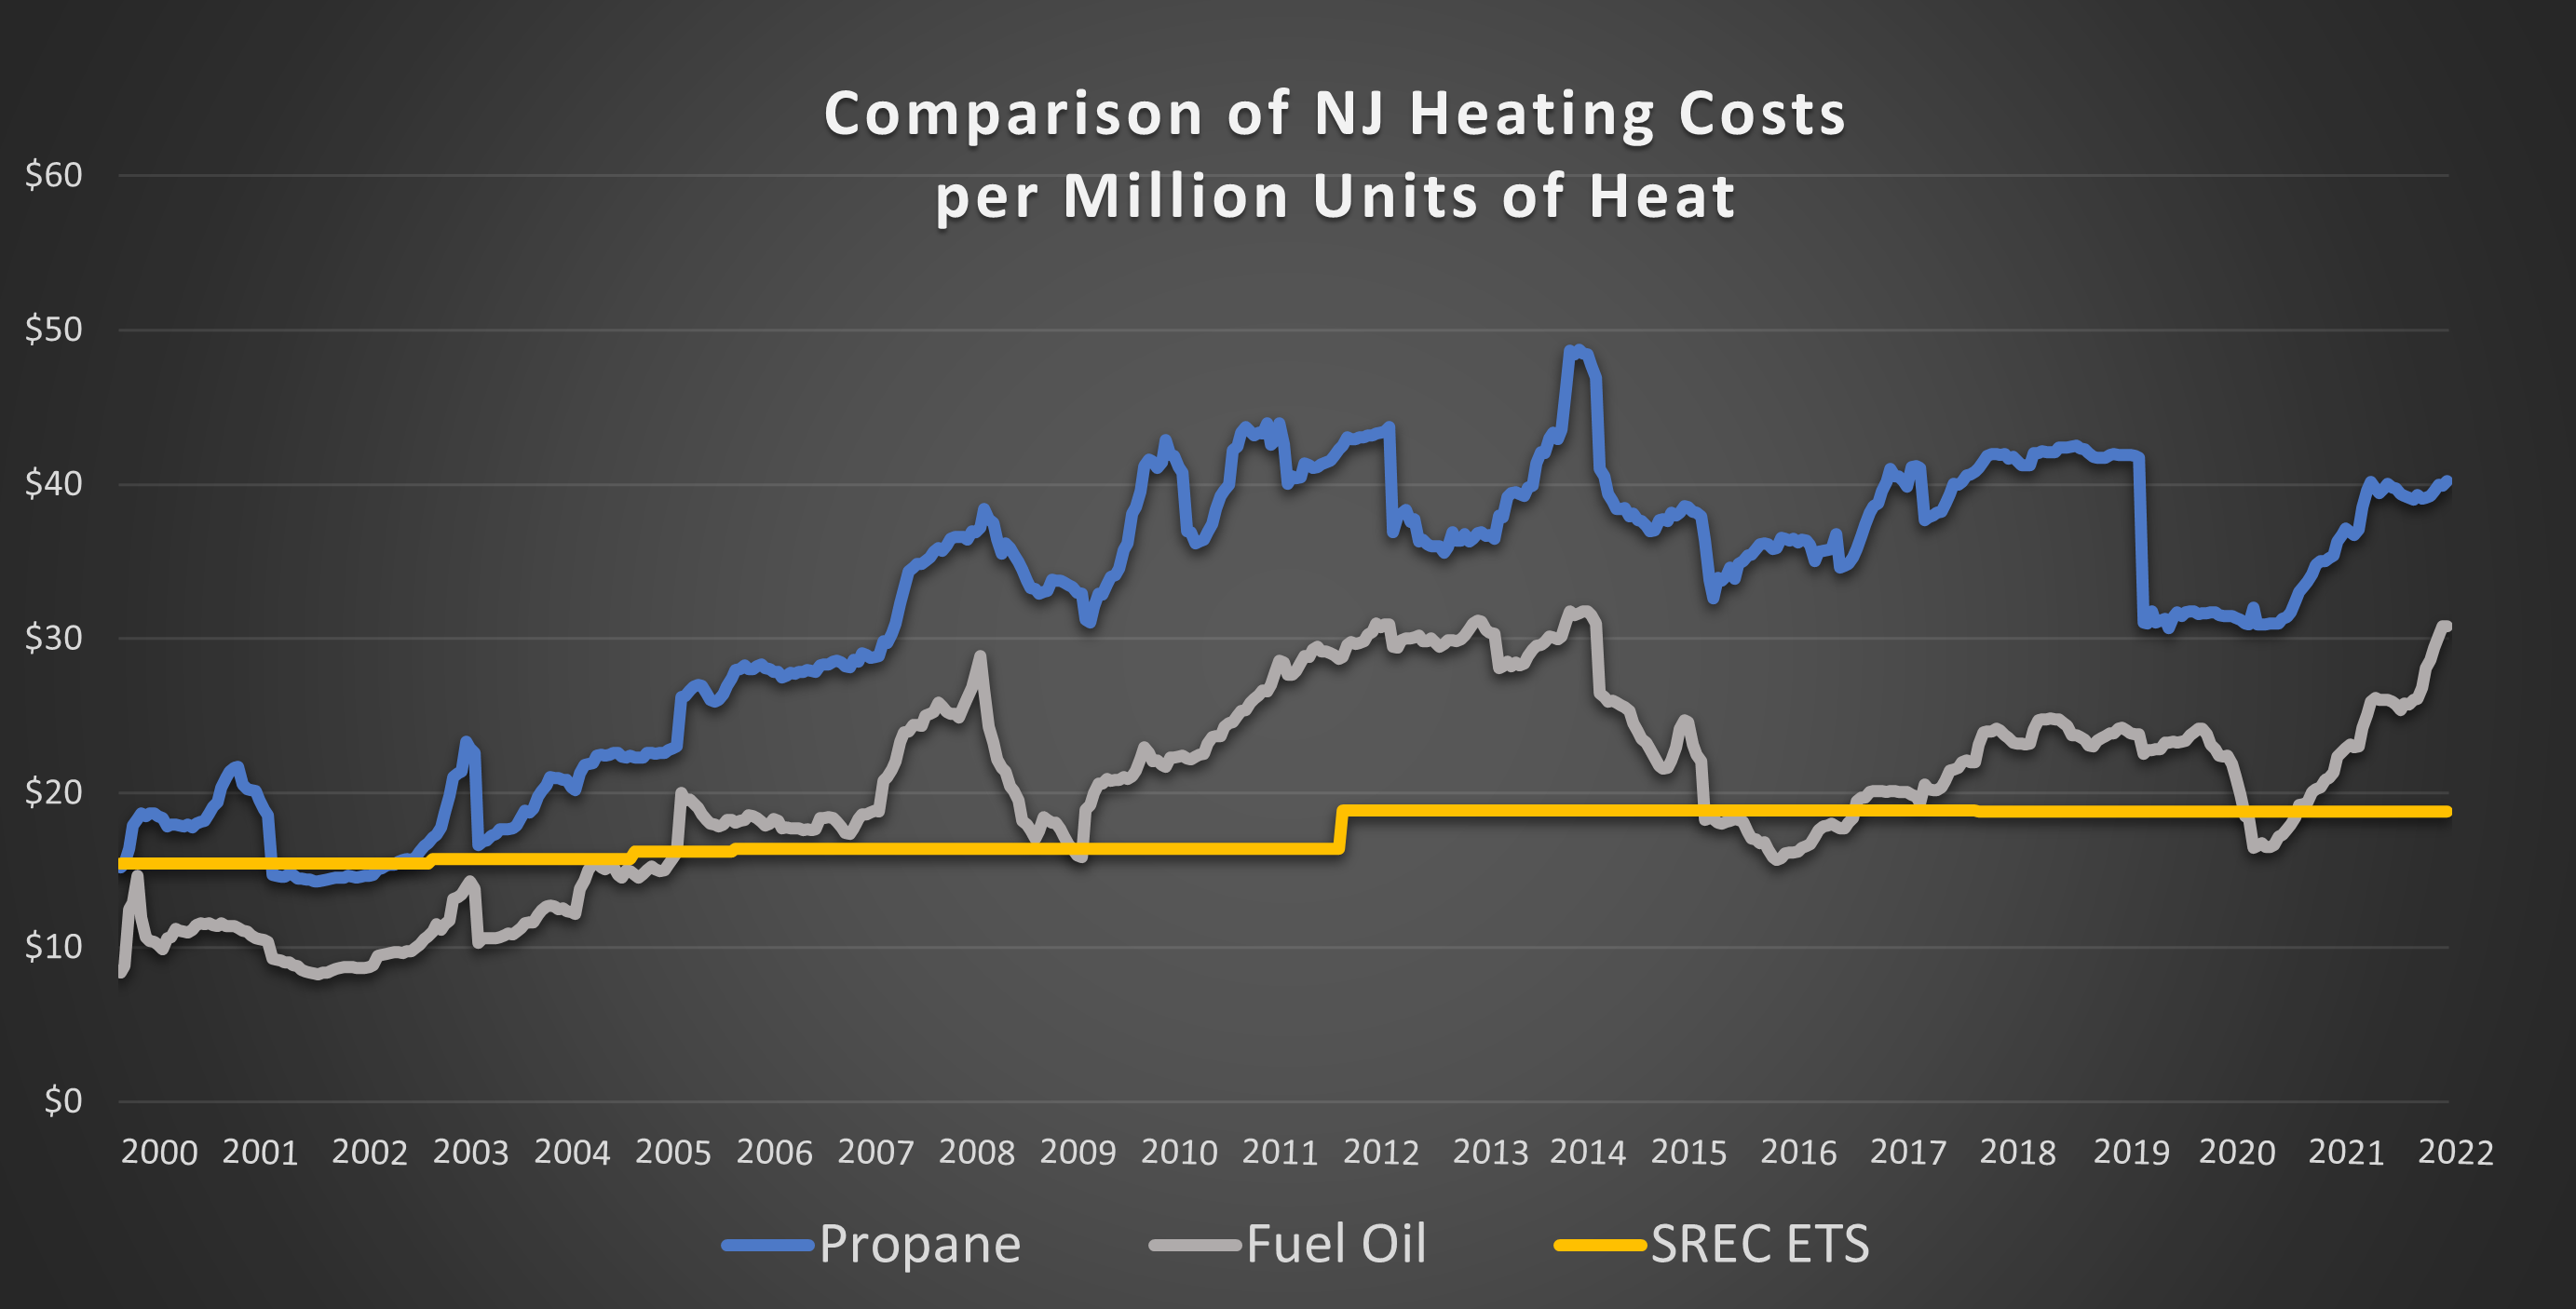 Chart showing price of ETS off-peak electricity compared to propane and fuel oil from 